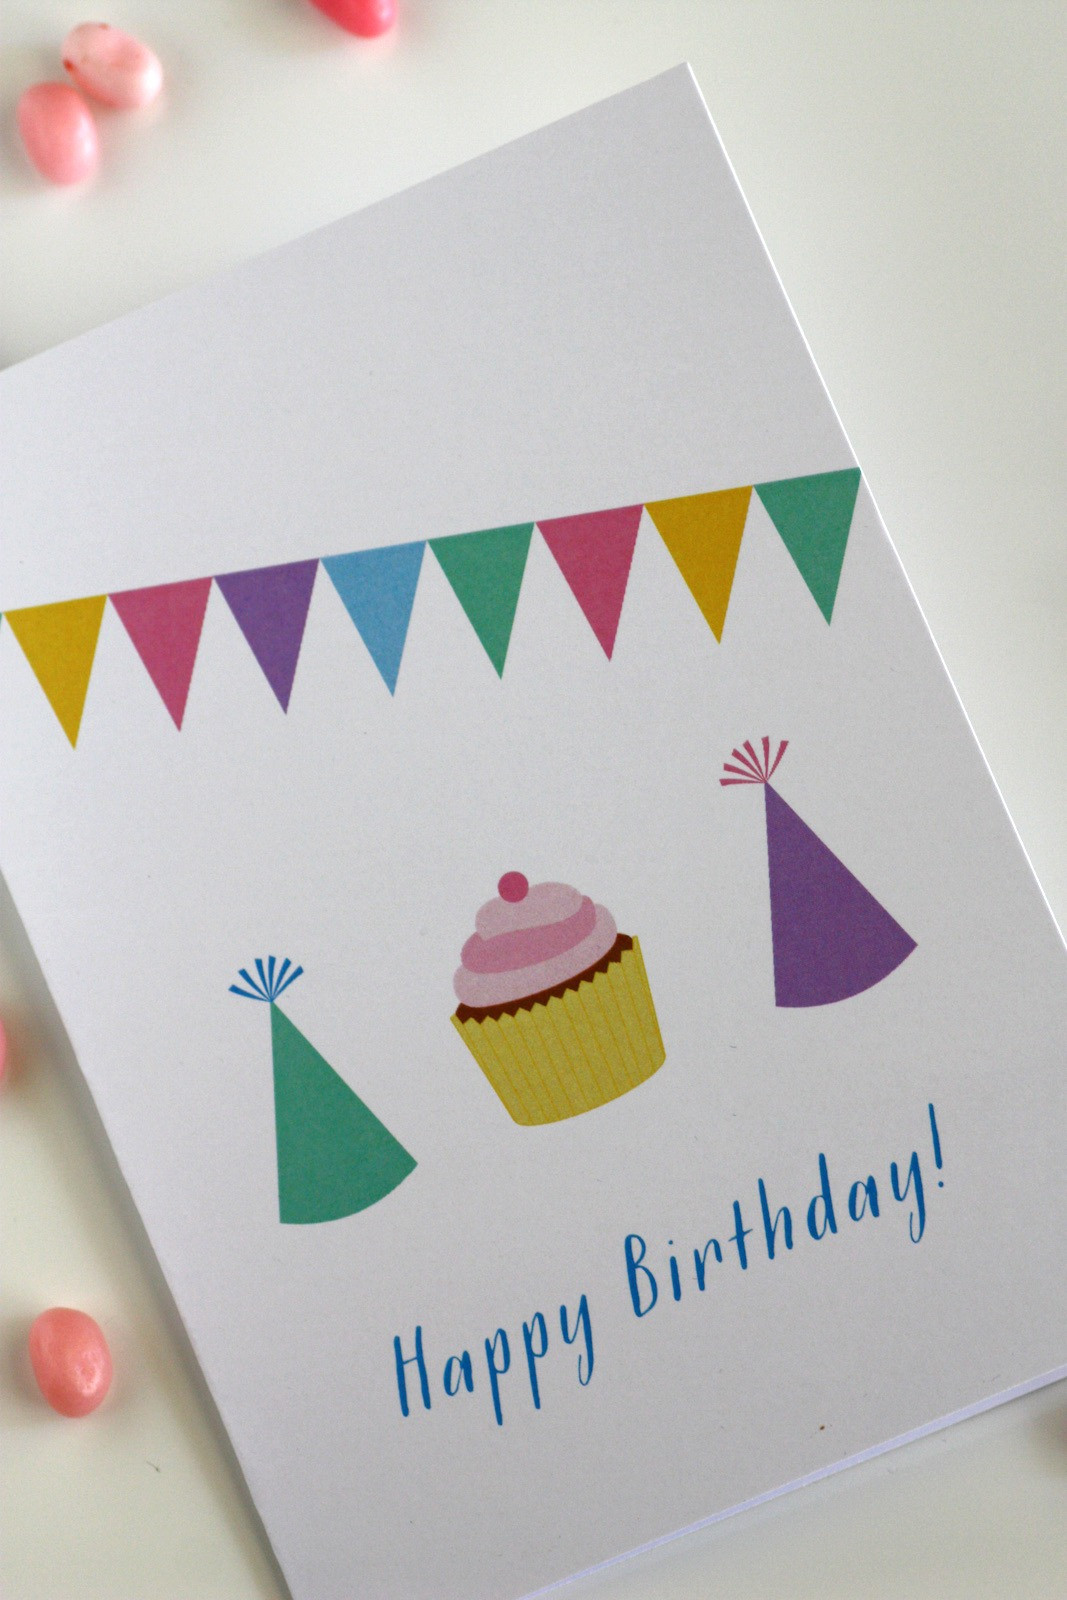 Free Printable Birthday Cards
 Download These Fun Free Printable Blank Birthday Cards Now